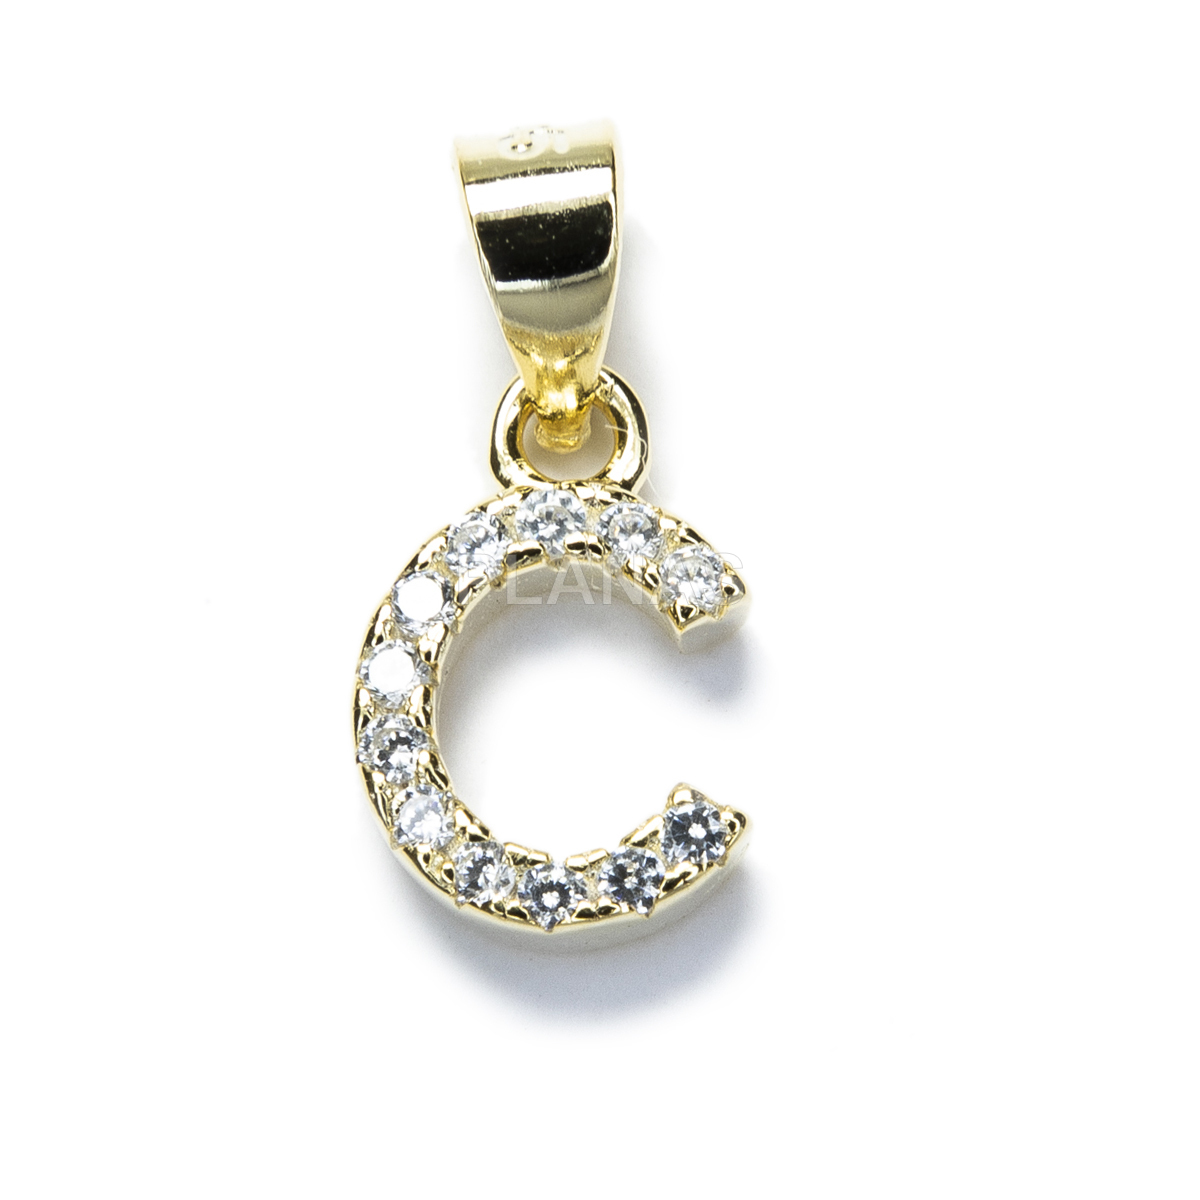 Letters pendant in sterling silver and gold plated with white zircons.